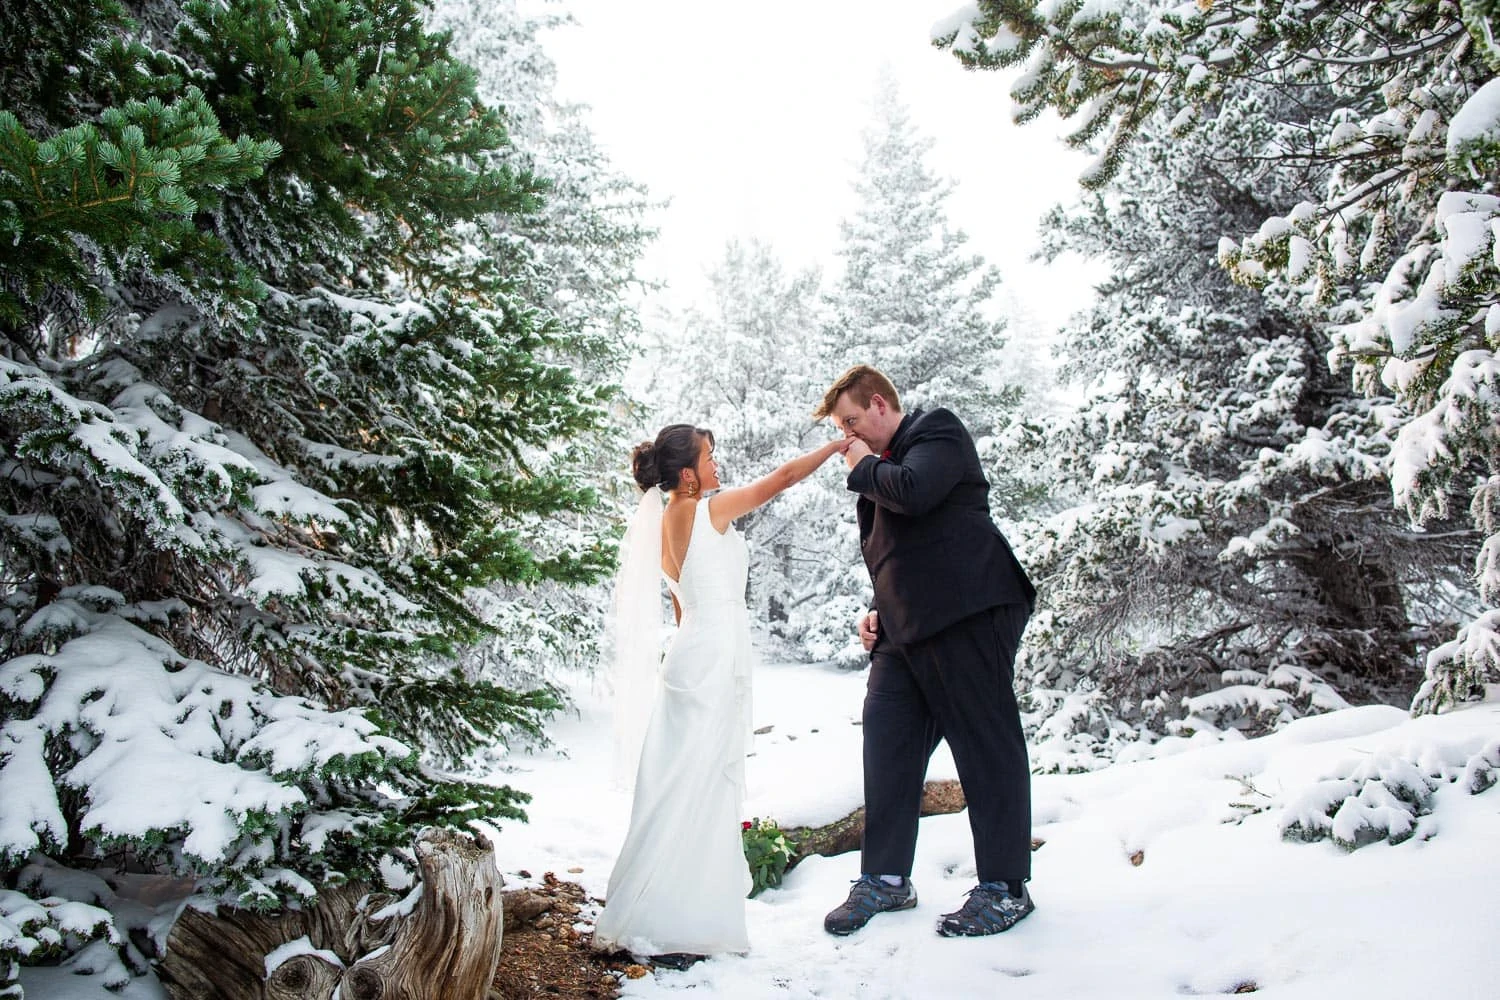 A groom kisses a bride's hand at their winter elopement surrounded by evergreen trees.